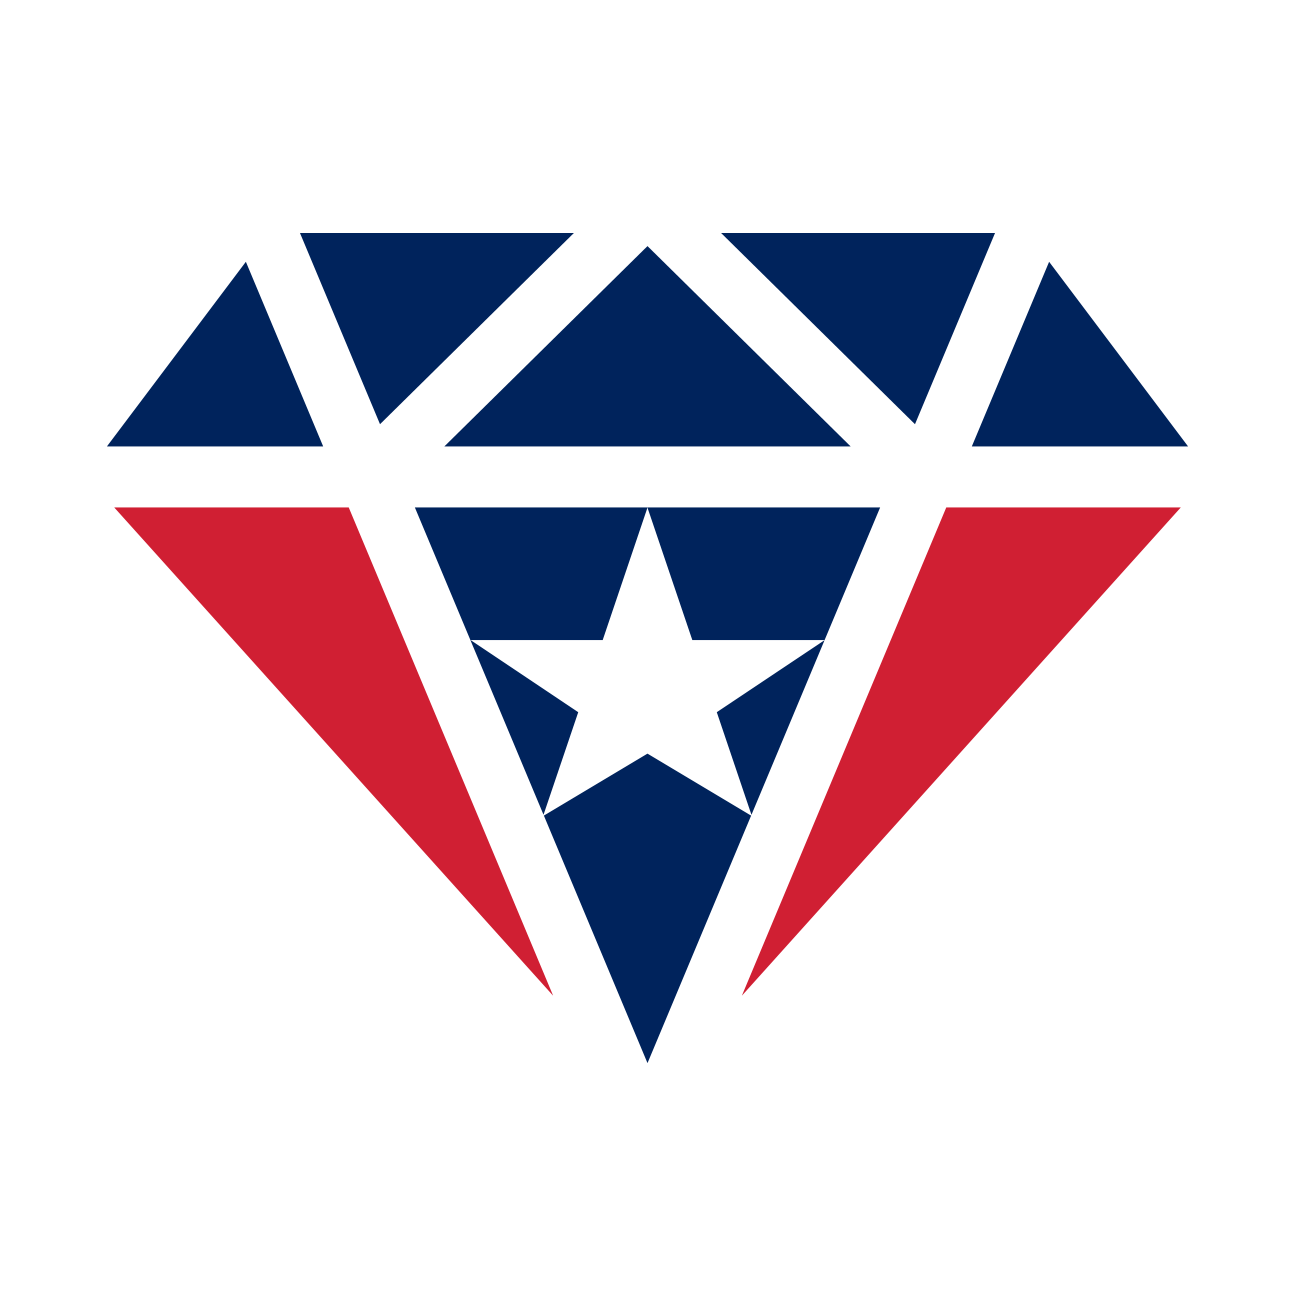 Red White and Blue Patriot Logo - ESPN came up with logos for NFL stars; Tom Brady's featured you